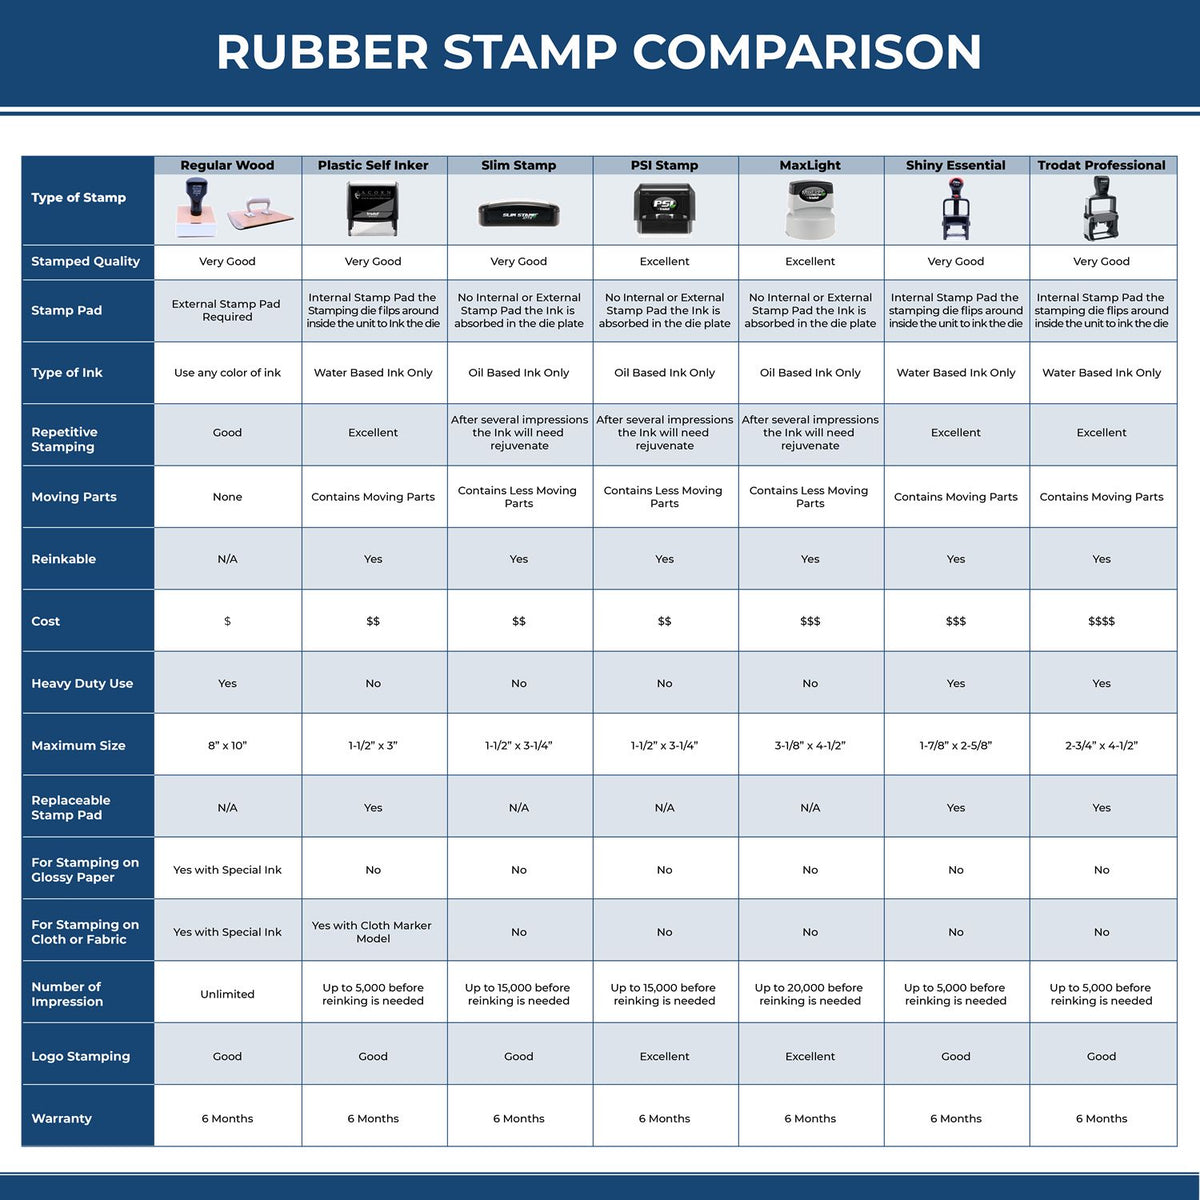 Large Self-Inking Extra Credit Stamp 5627S Rubber Stamp Comparison